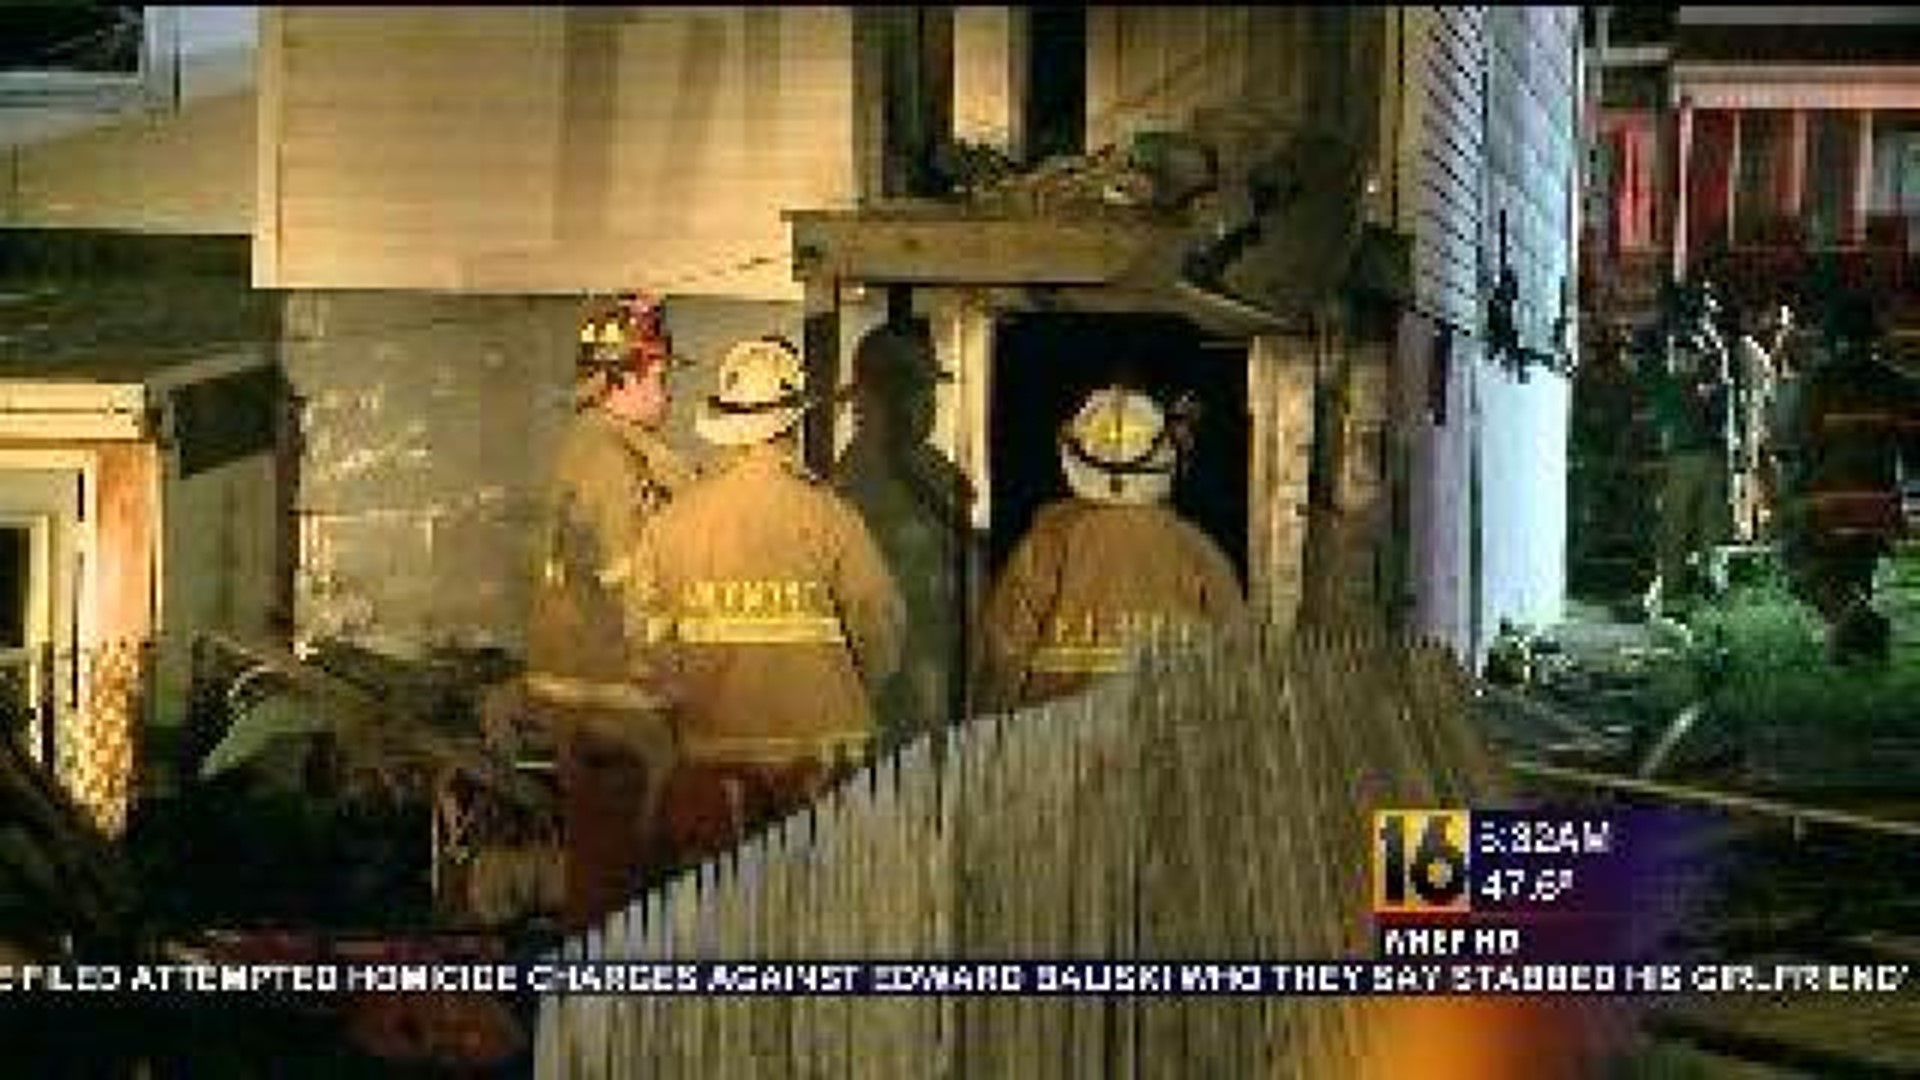 Firefighter Hospitalized After Fighting Flames